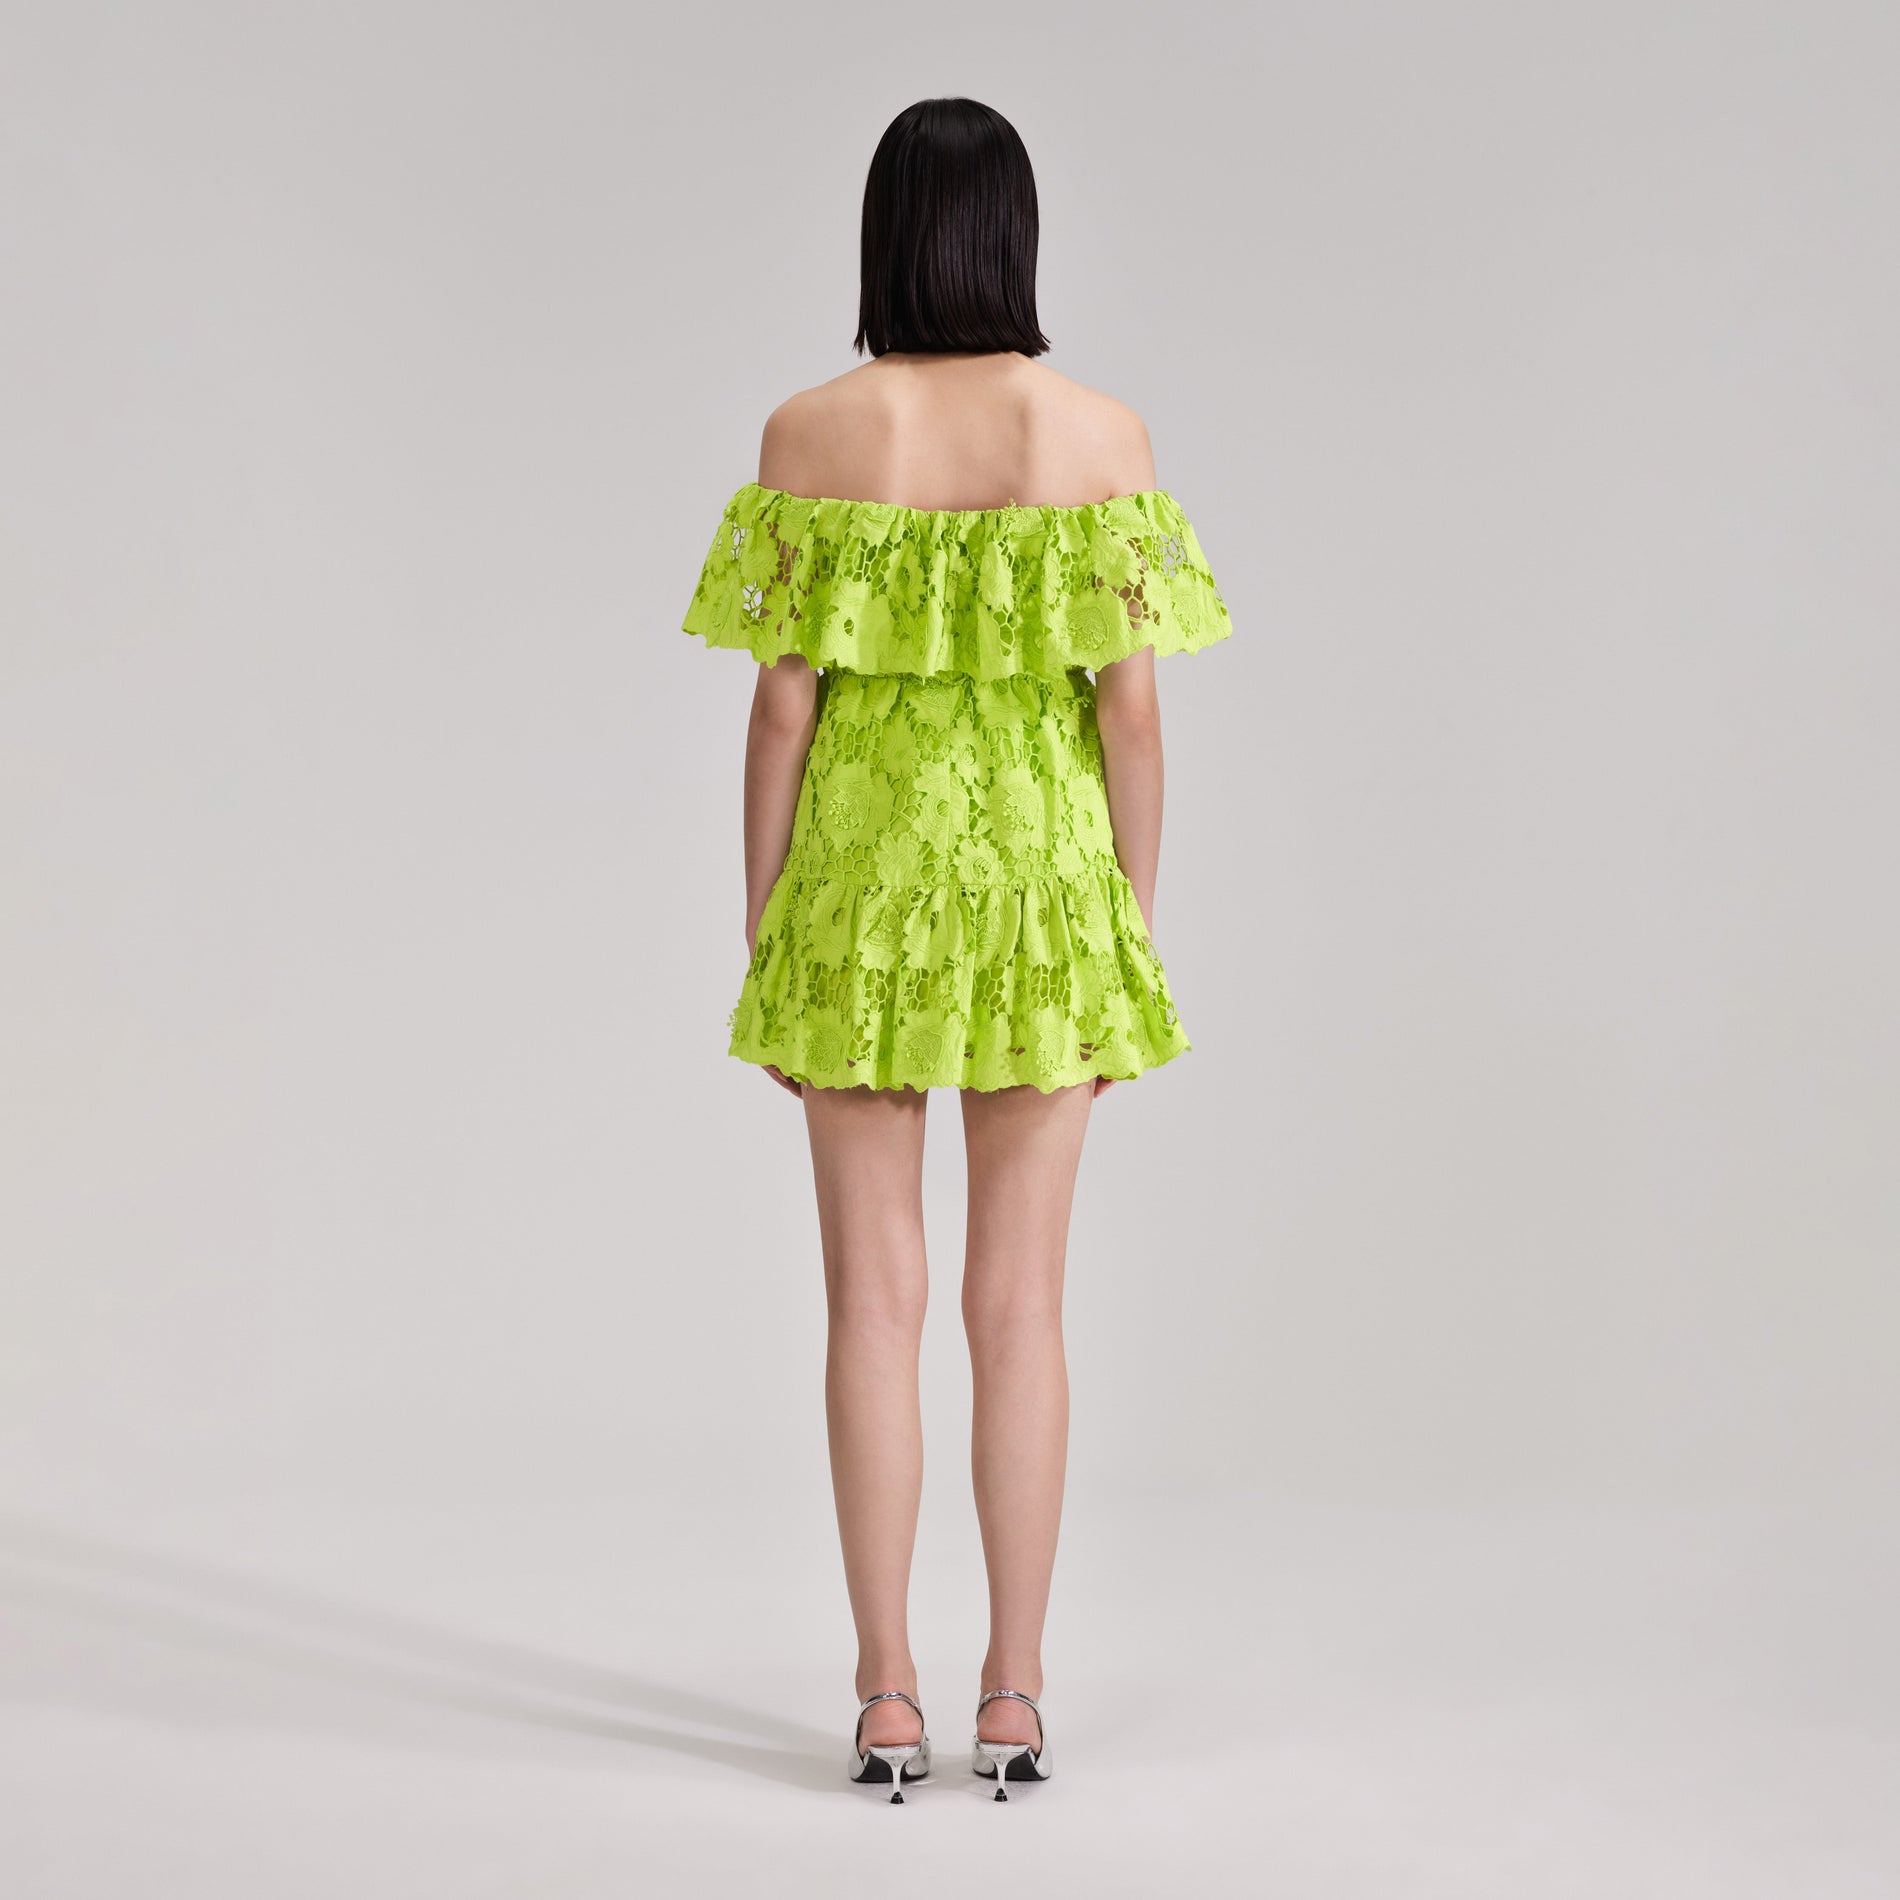 A woman wearing the Green Lace Off Shoulder Mini Dress